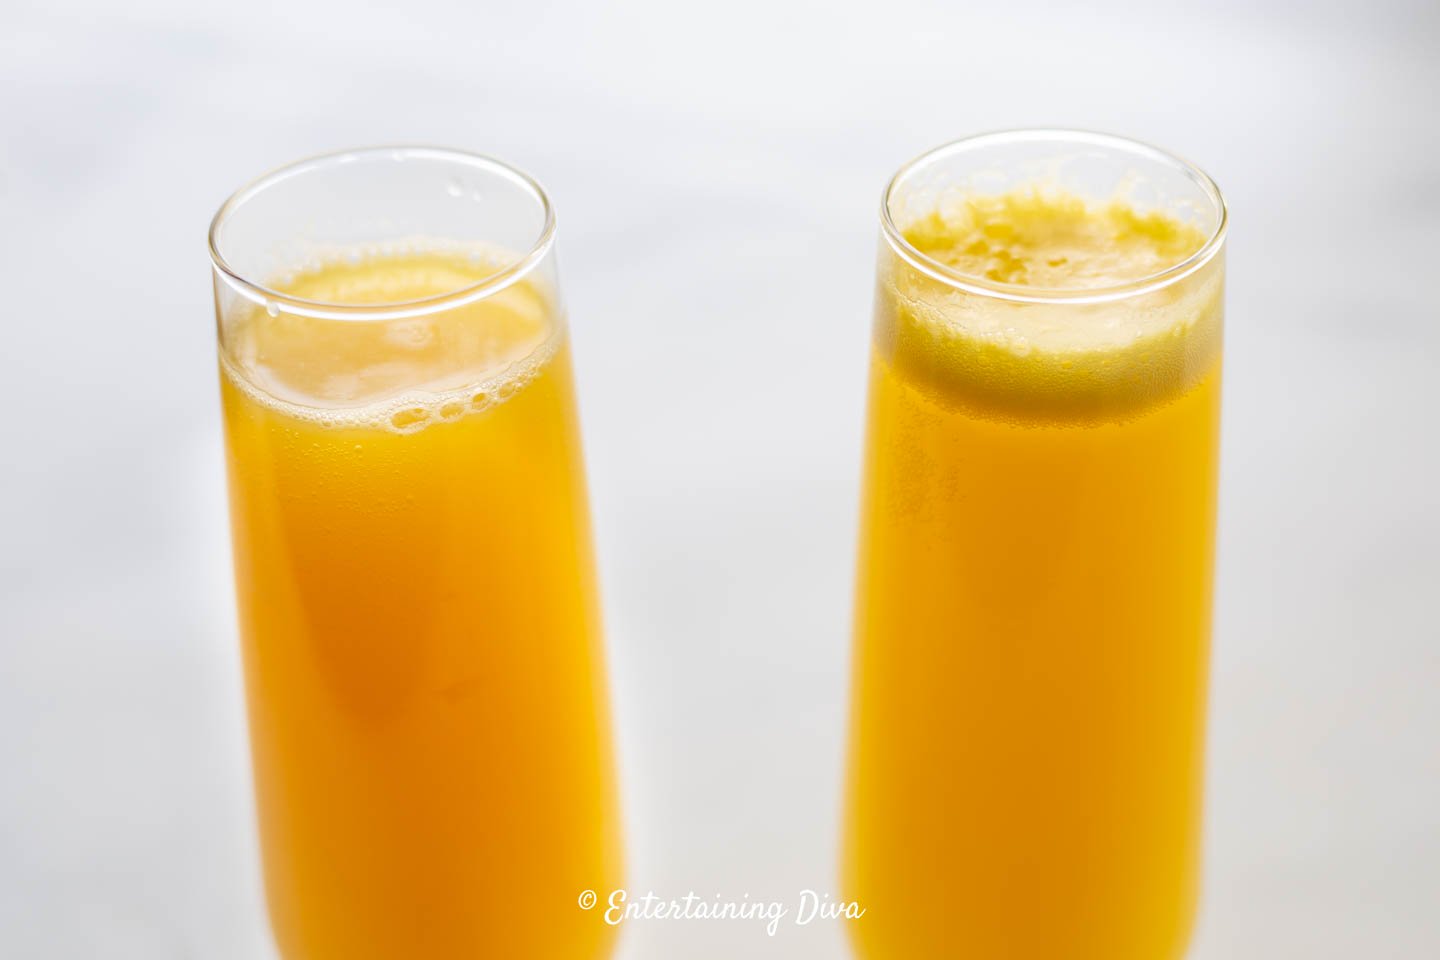 Comparison of Mimosa with champagne poured first vs orange juice poured first